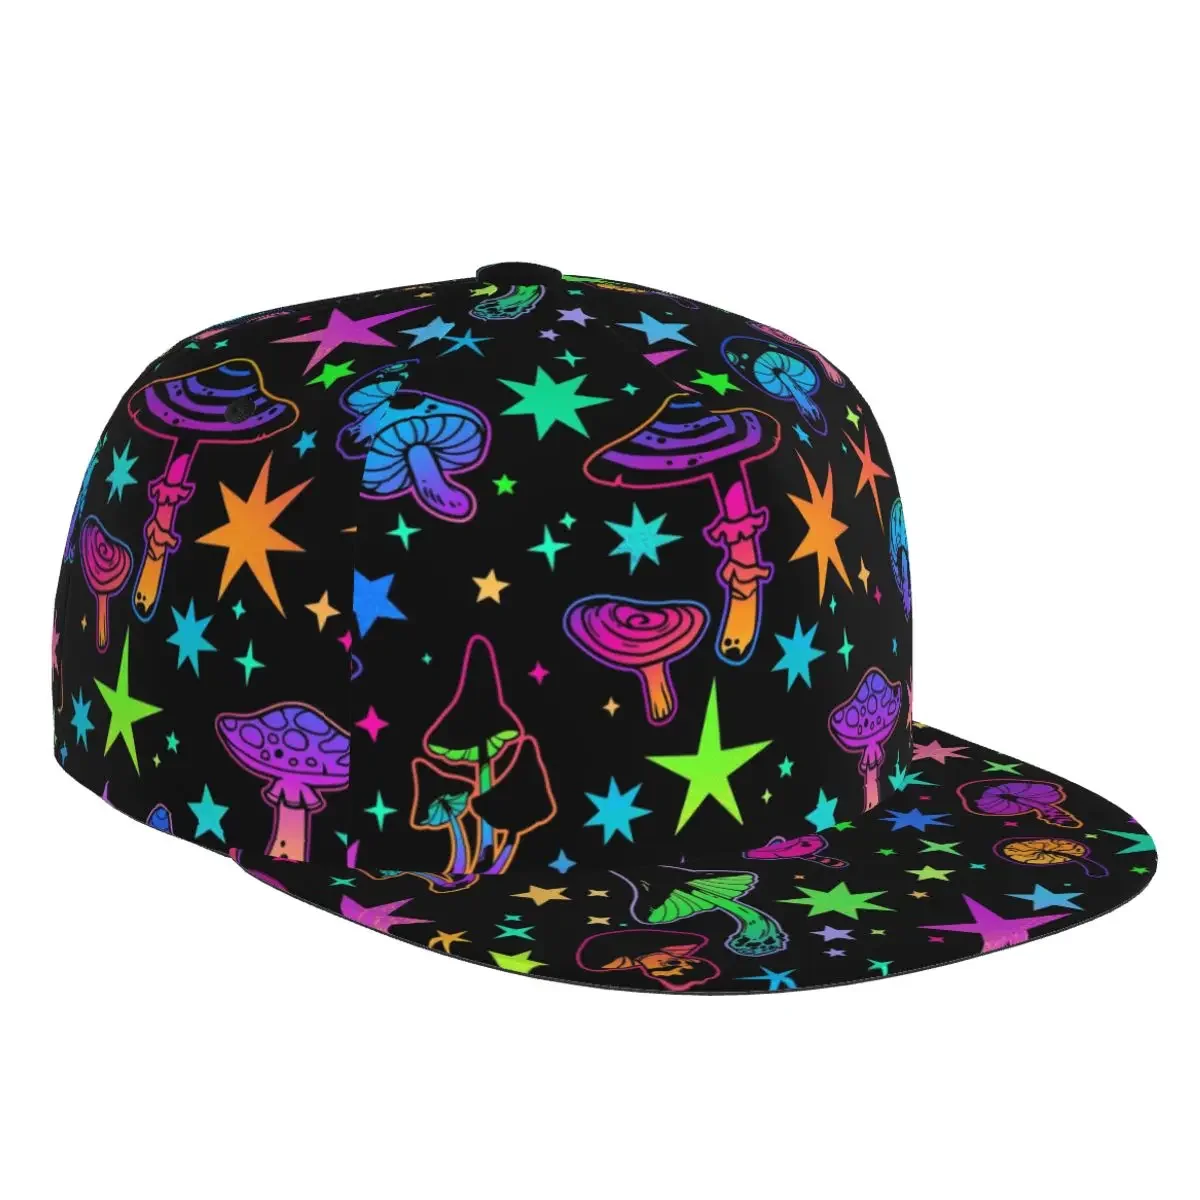 

Shiny Stars And Psychedelic Mushrooms 3D Print Baseball Cap Casual Sun Hat Elegant Ethnic Style Fashion Stage Hip Hop Women Men